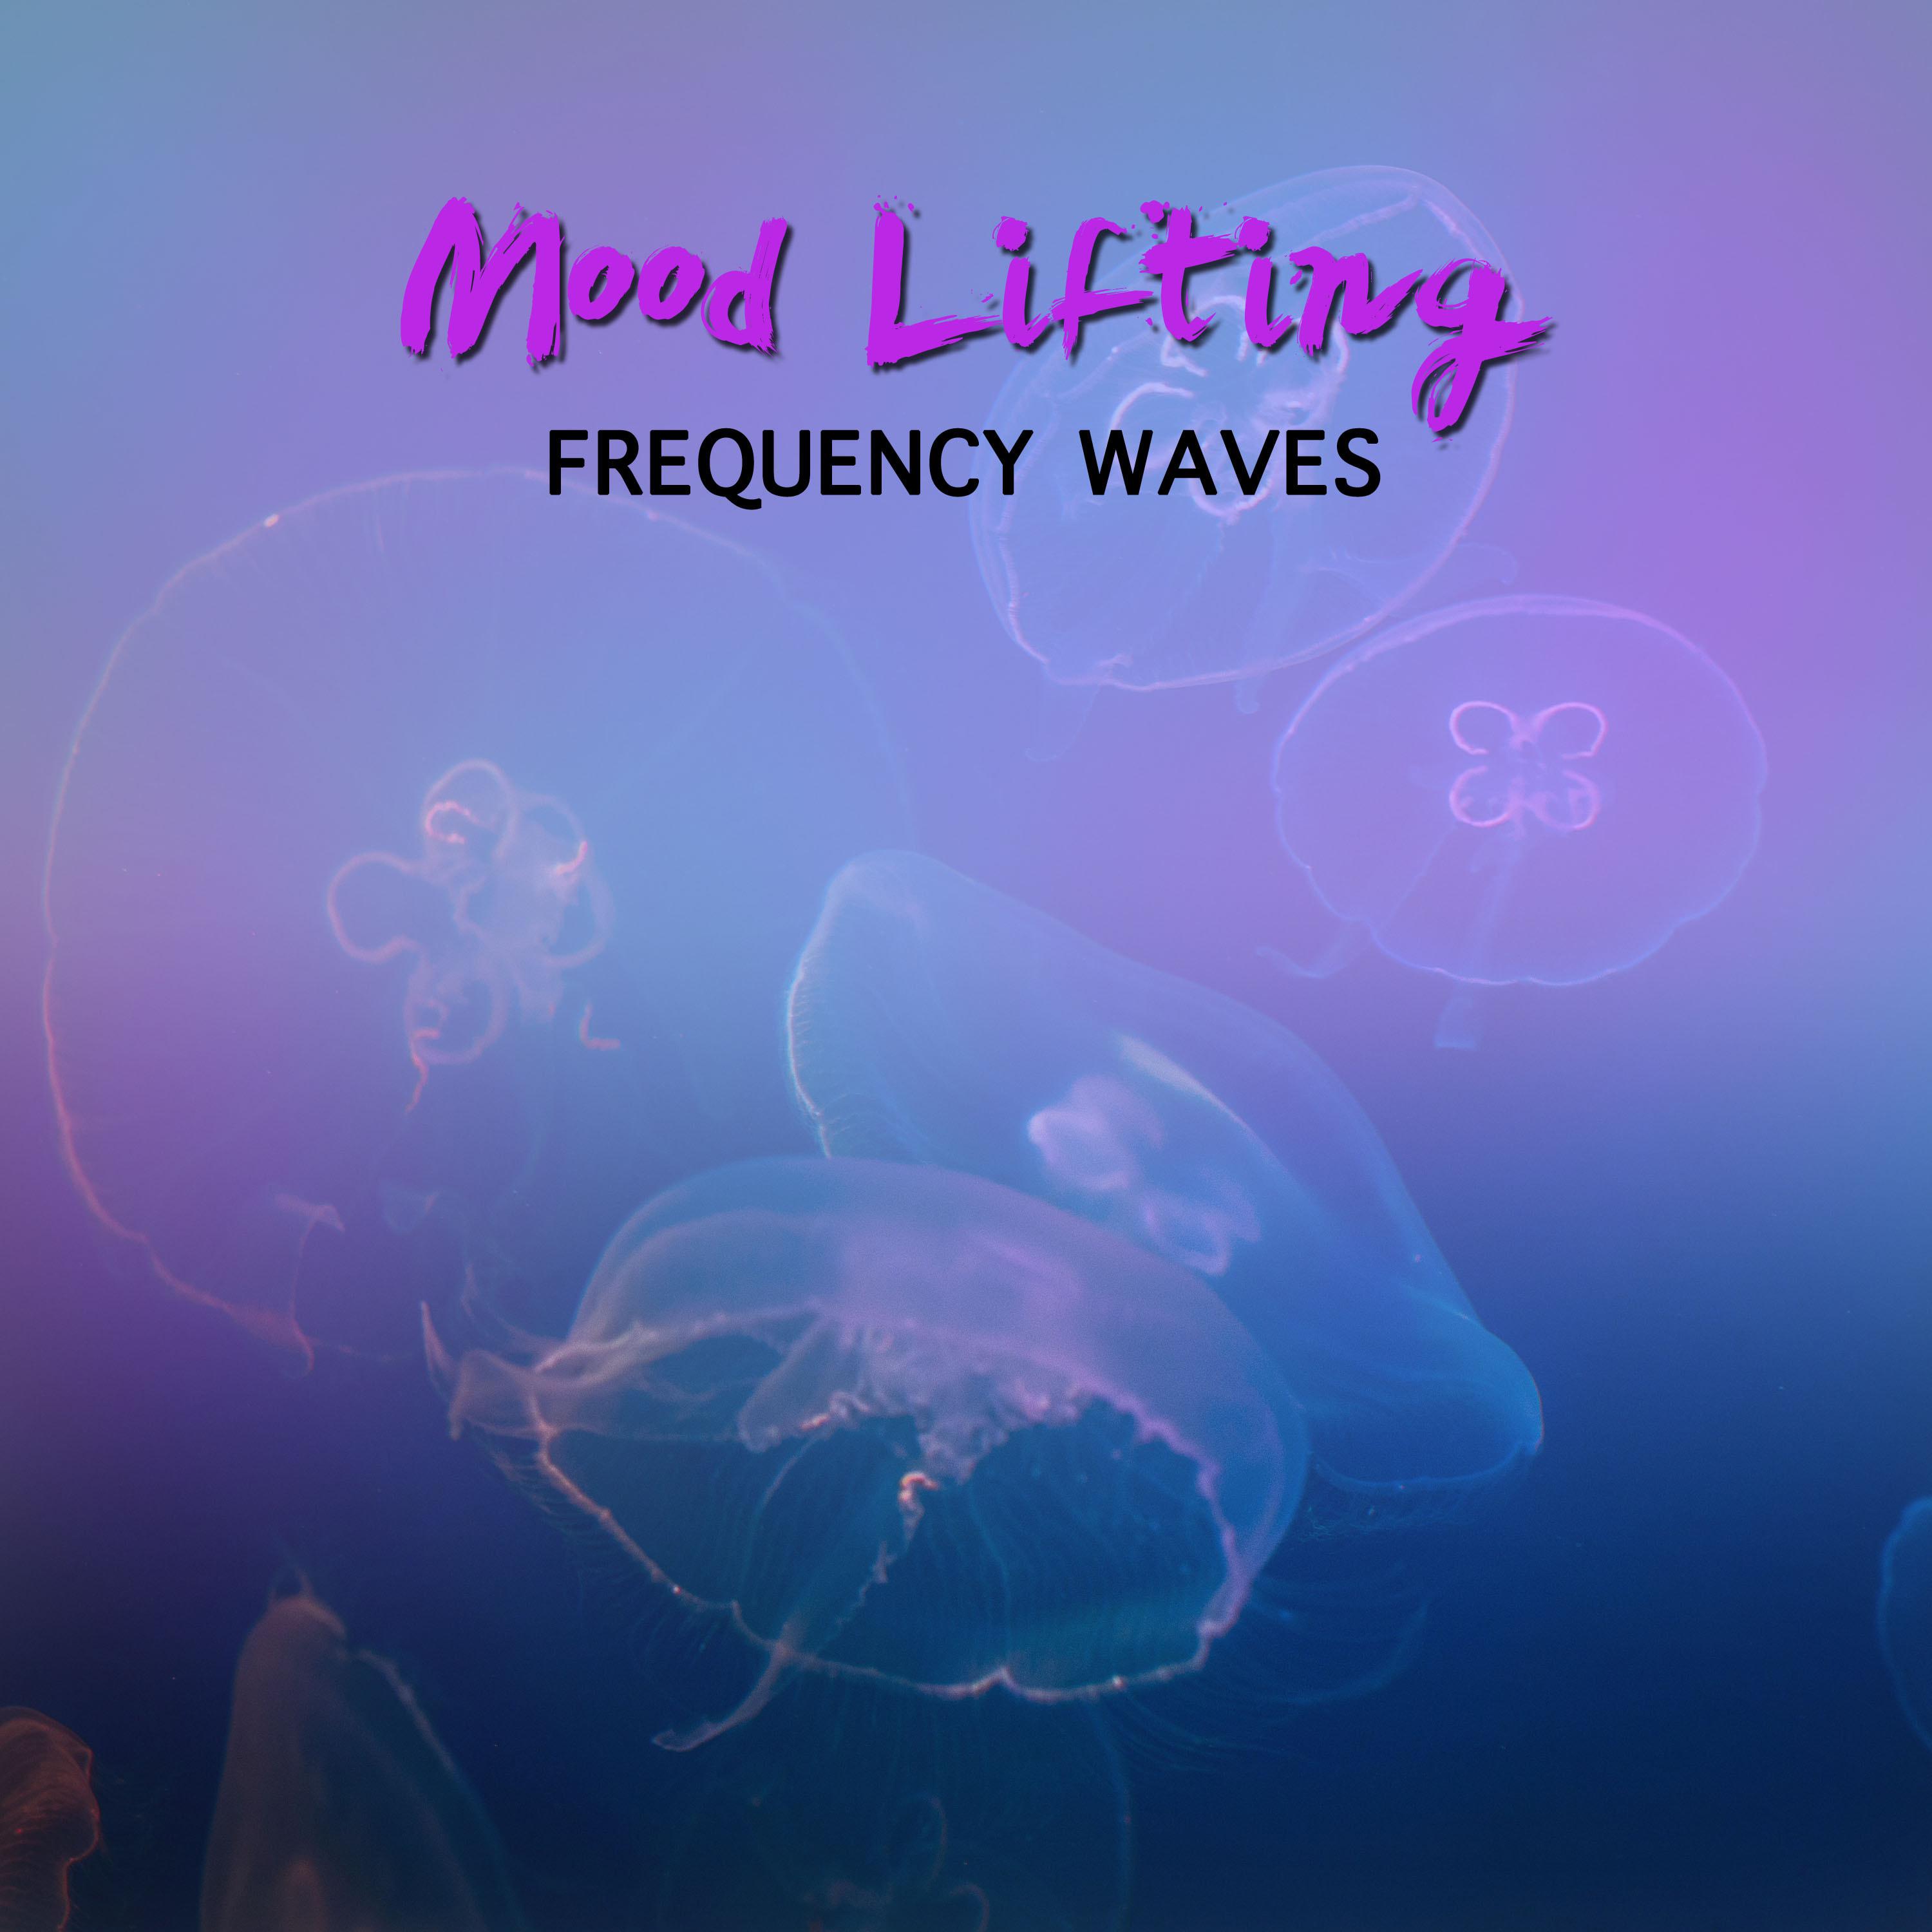 #7 Mood Lifting Frequency Waves